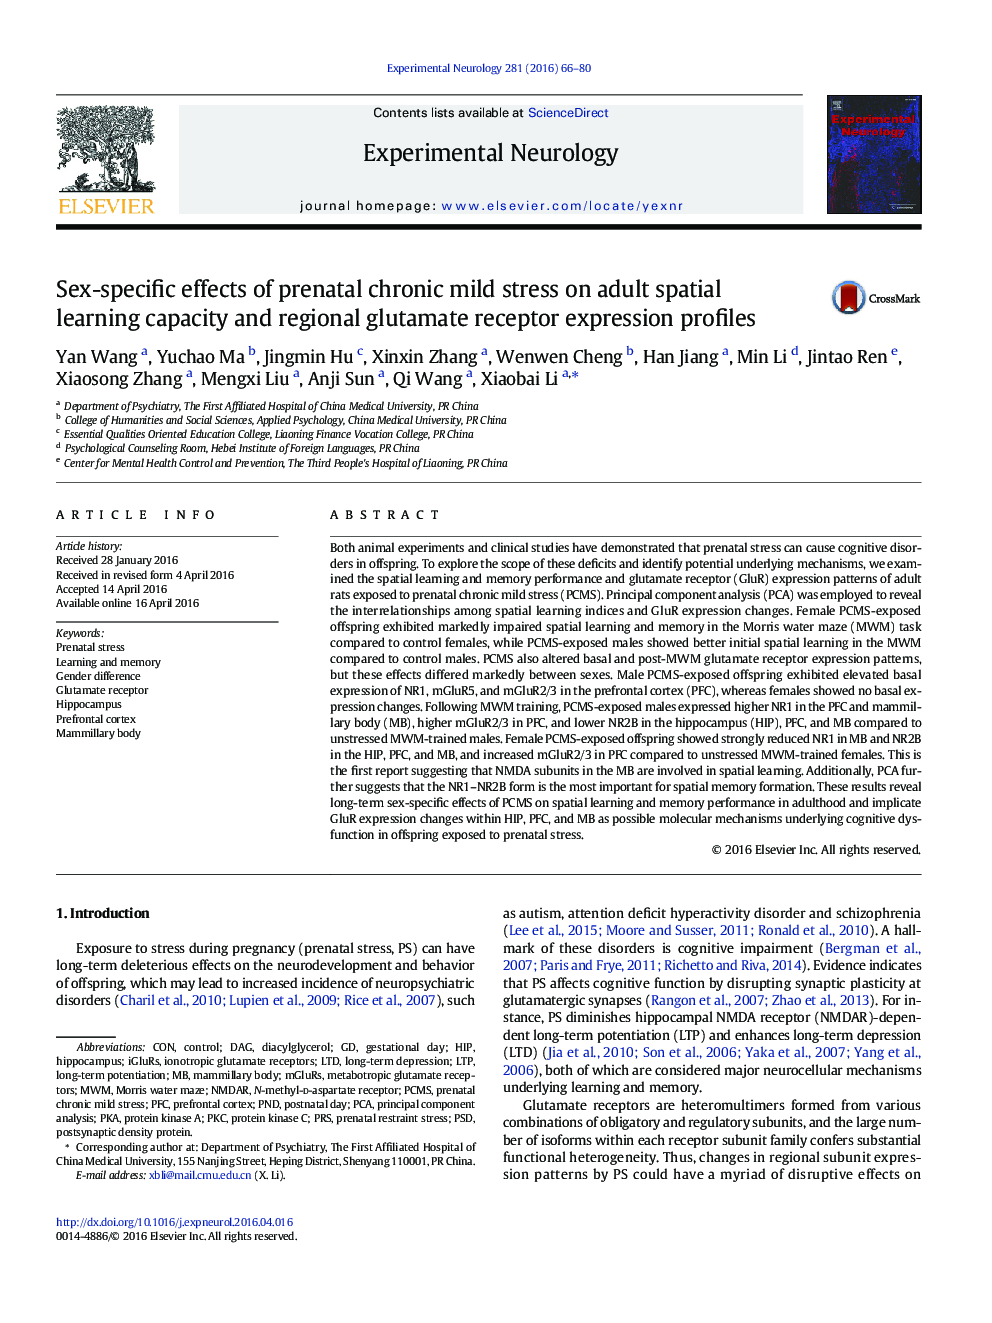 Sex-specific effects of prenatal chronic mild stress on adult spatial learning capacity and regional glutamate receptor expression profiles